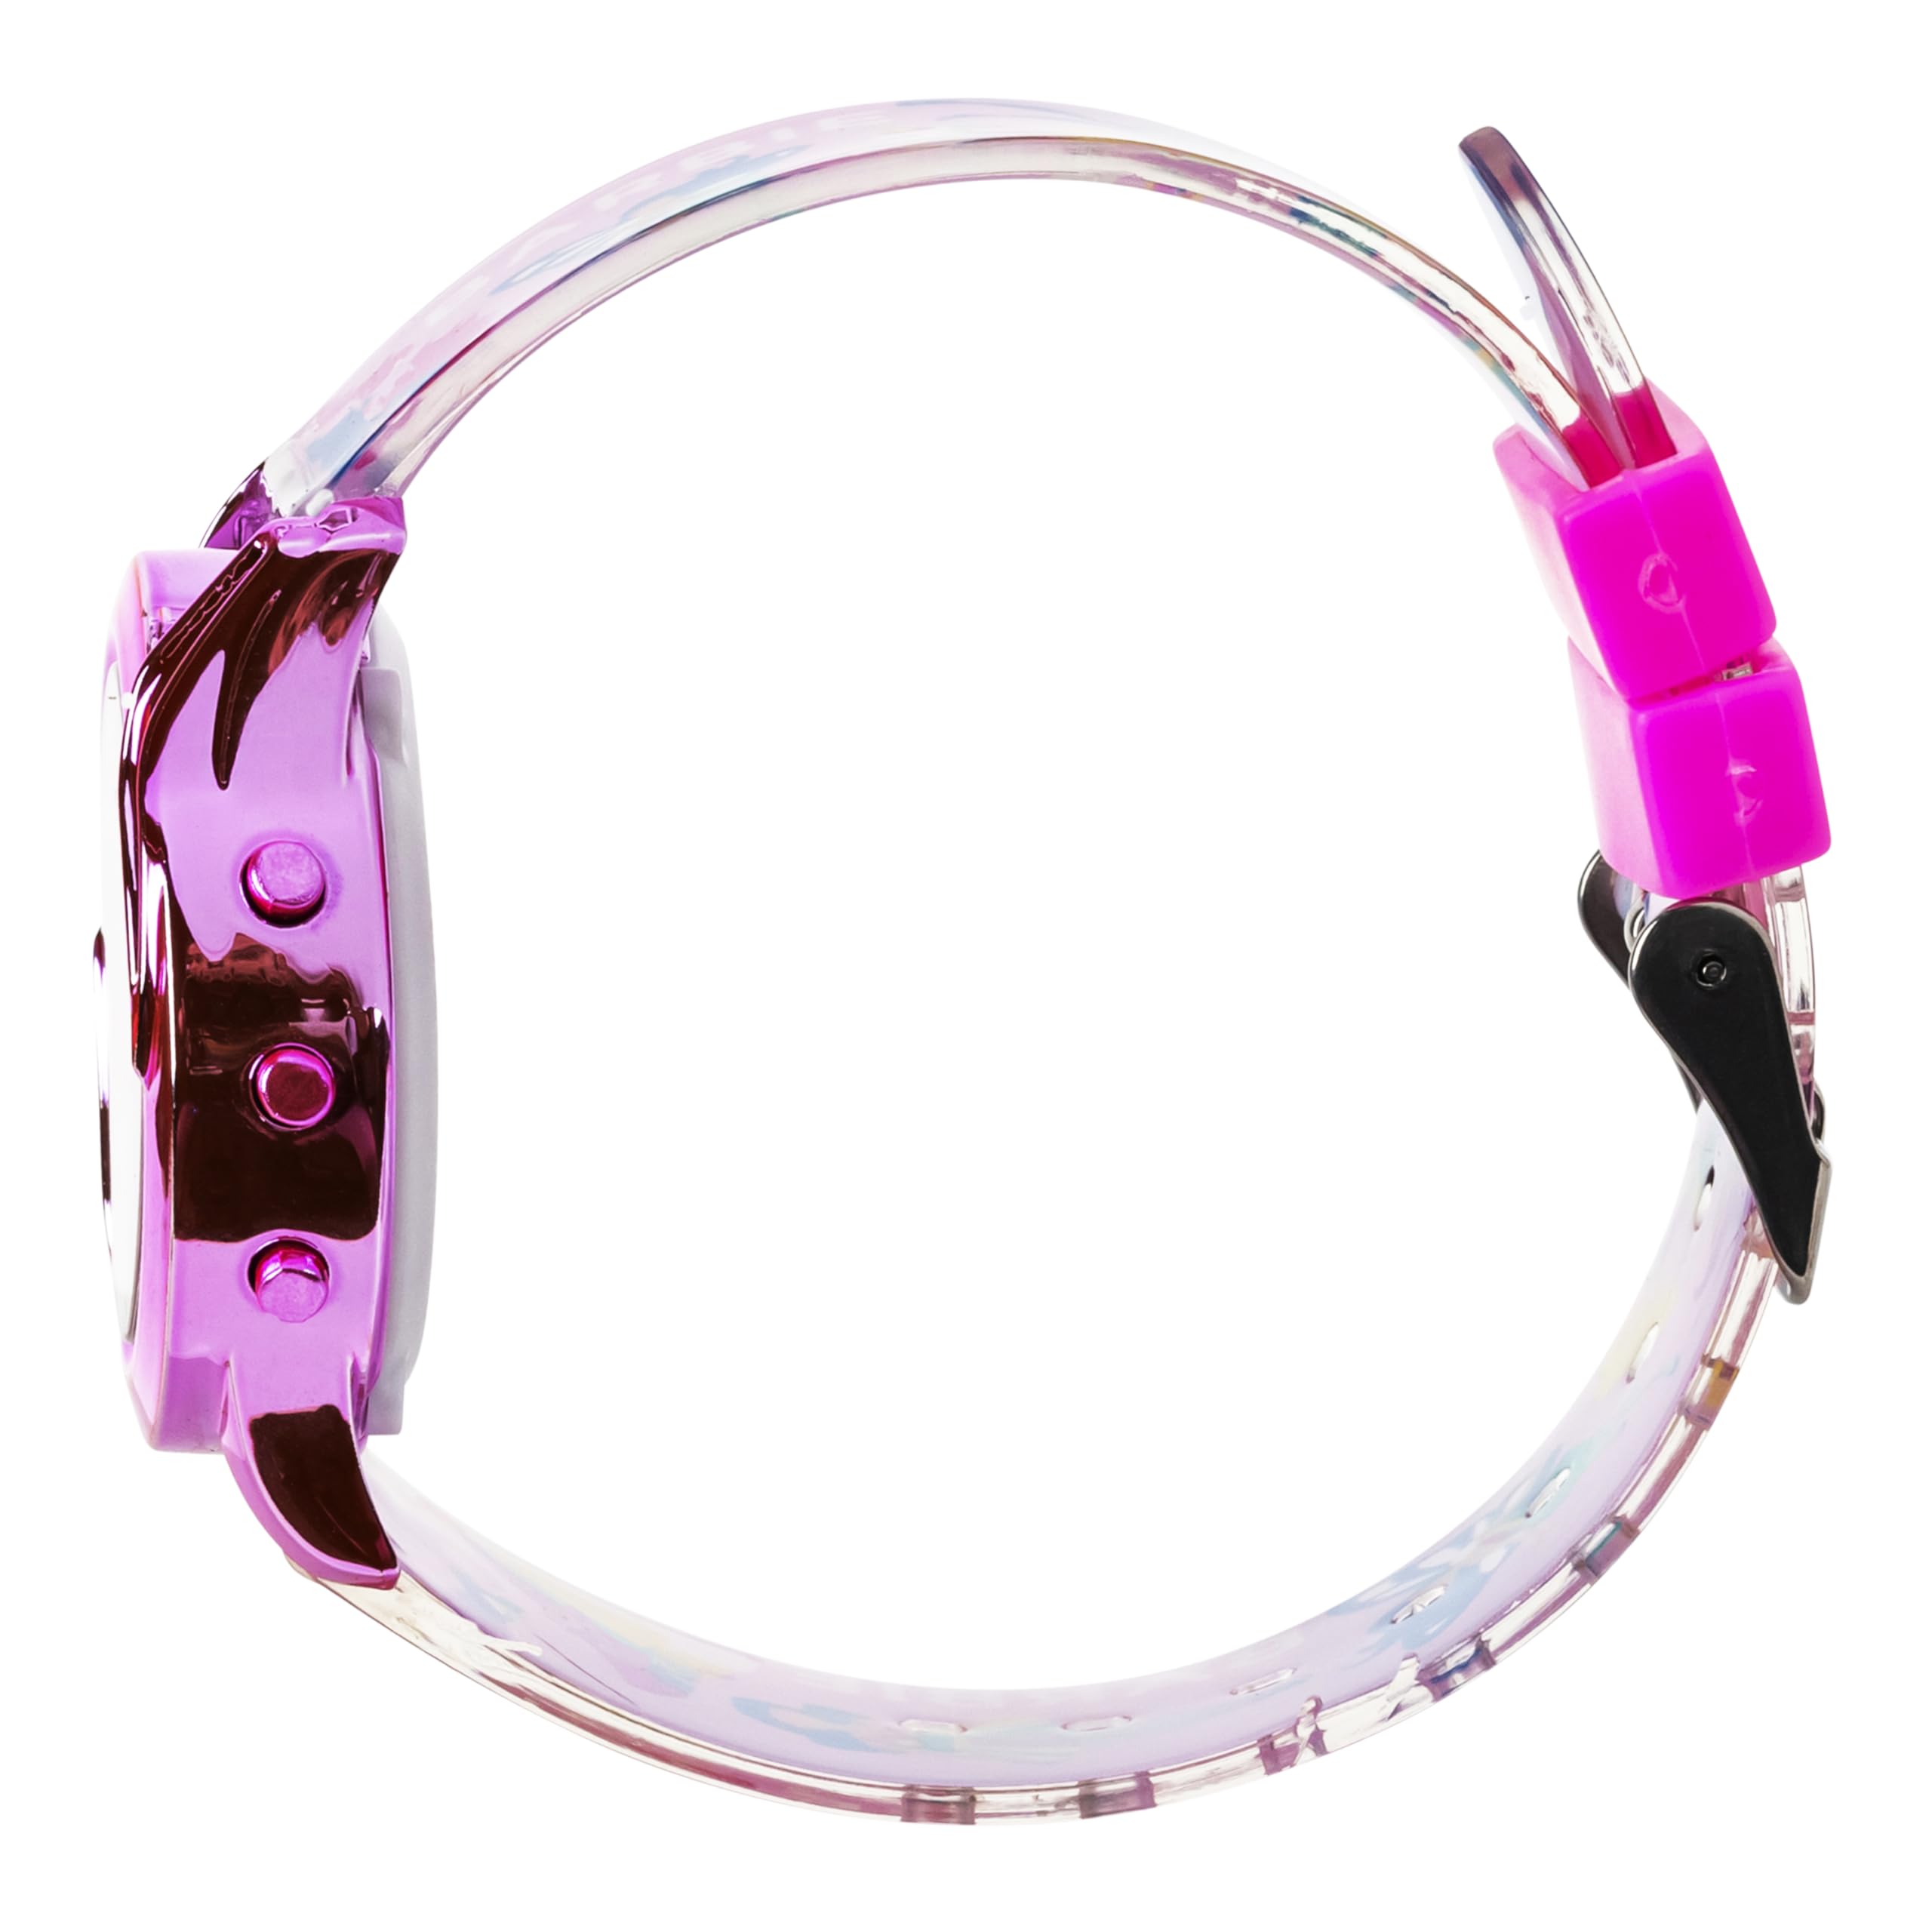 Accutime Barbie The Movie Digital LCD Quartz Kids Pink Watch for Girls with Pink Unicorn and Fairytale Barbie Band Strap (Model: BDT4124AZ)